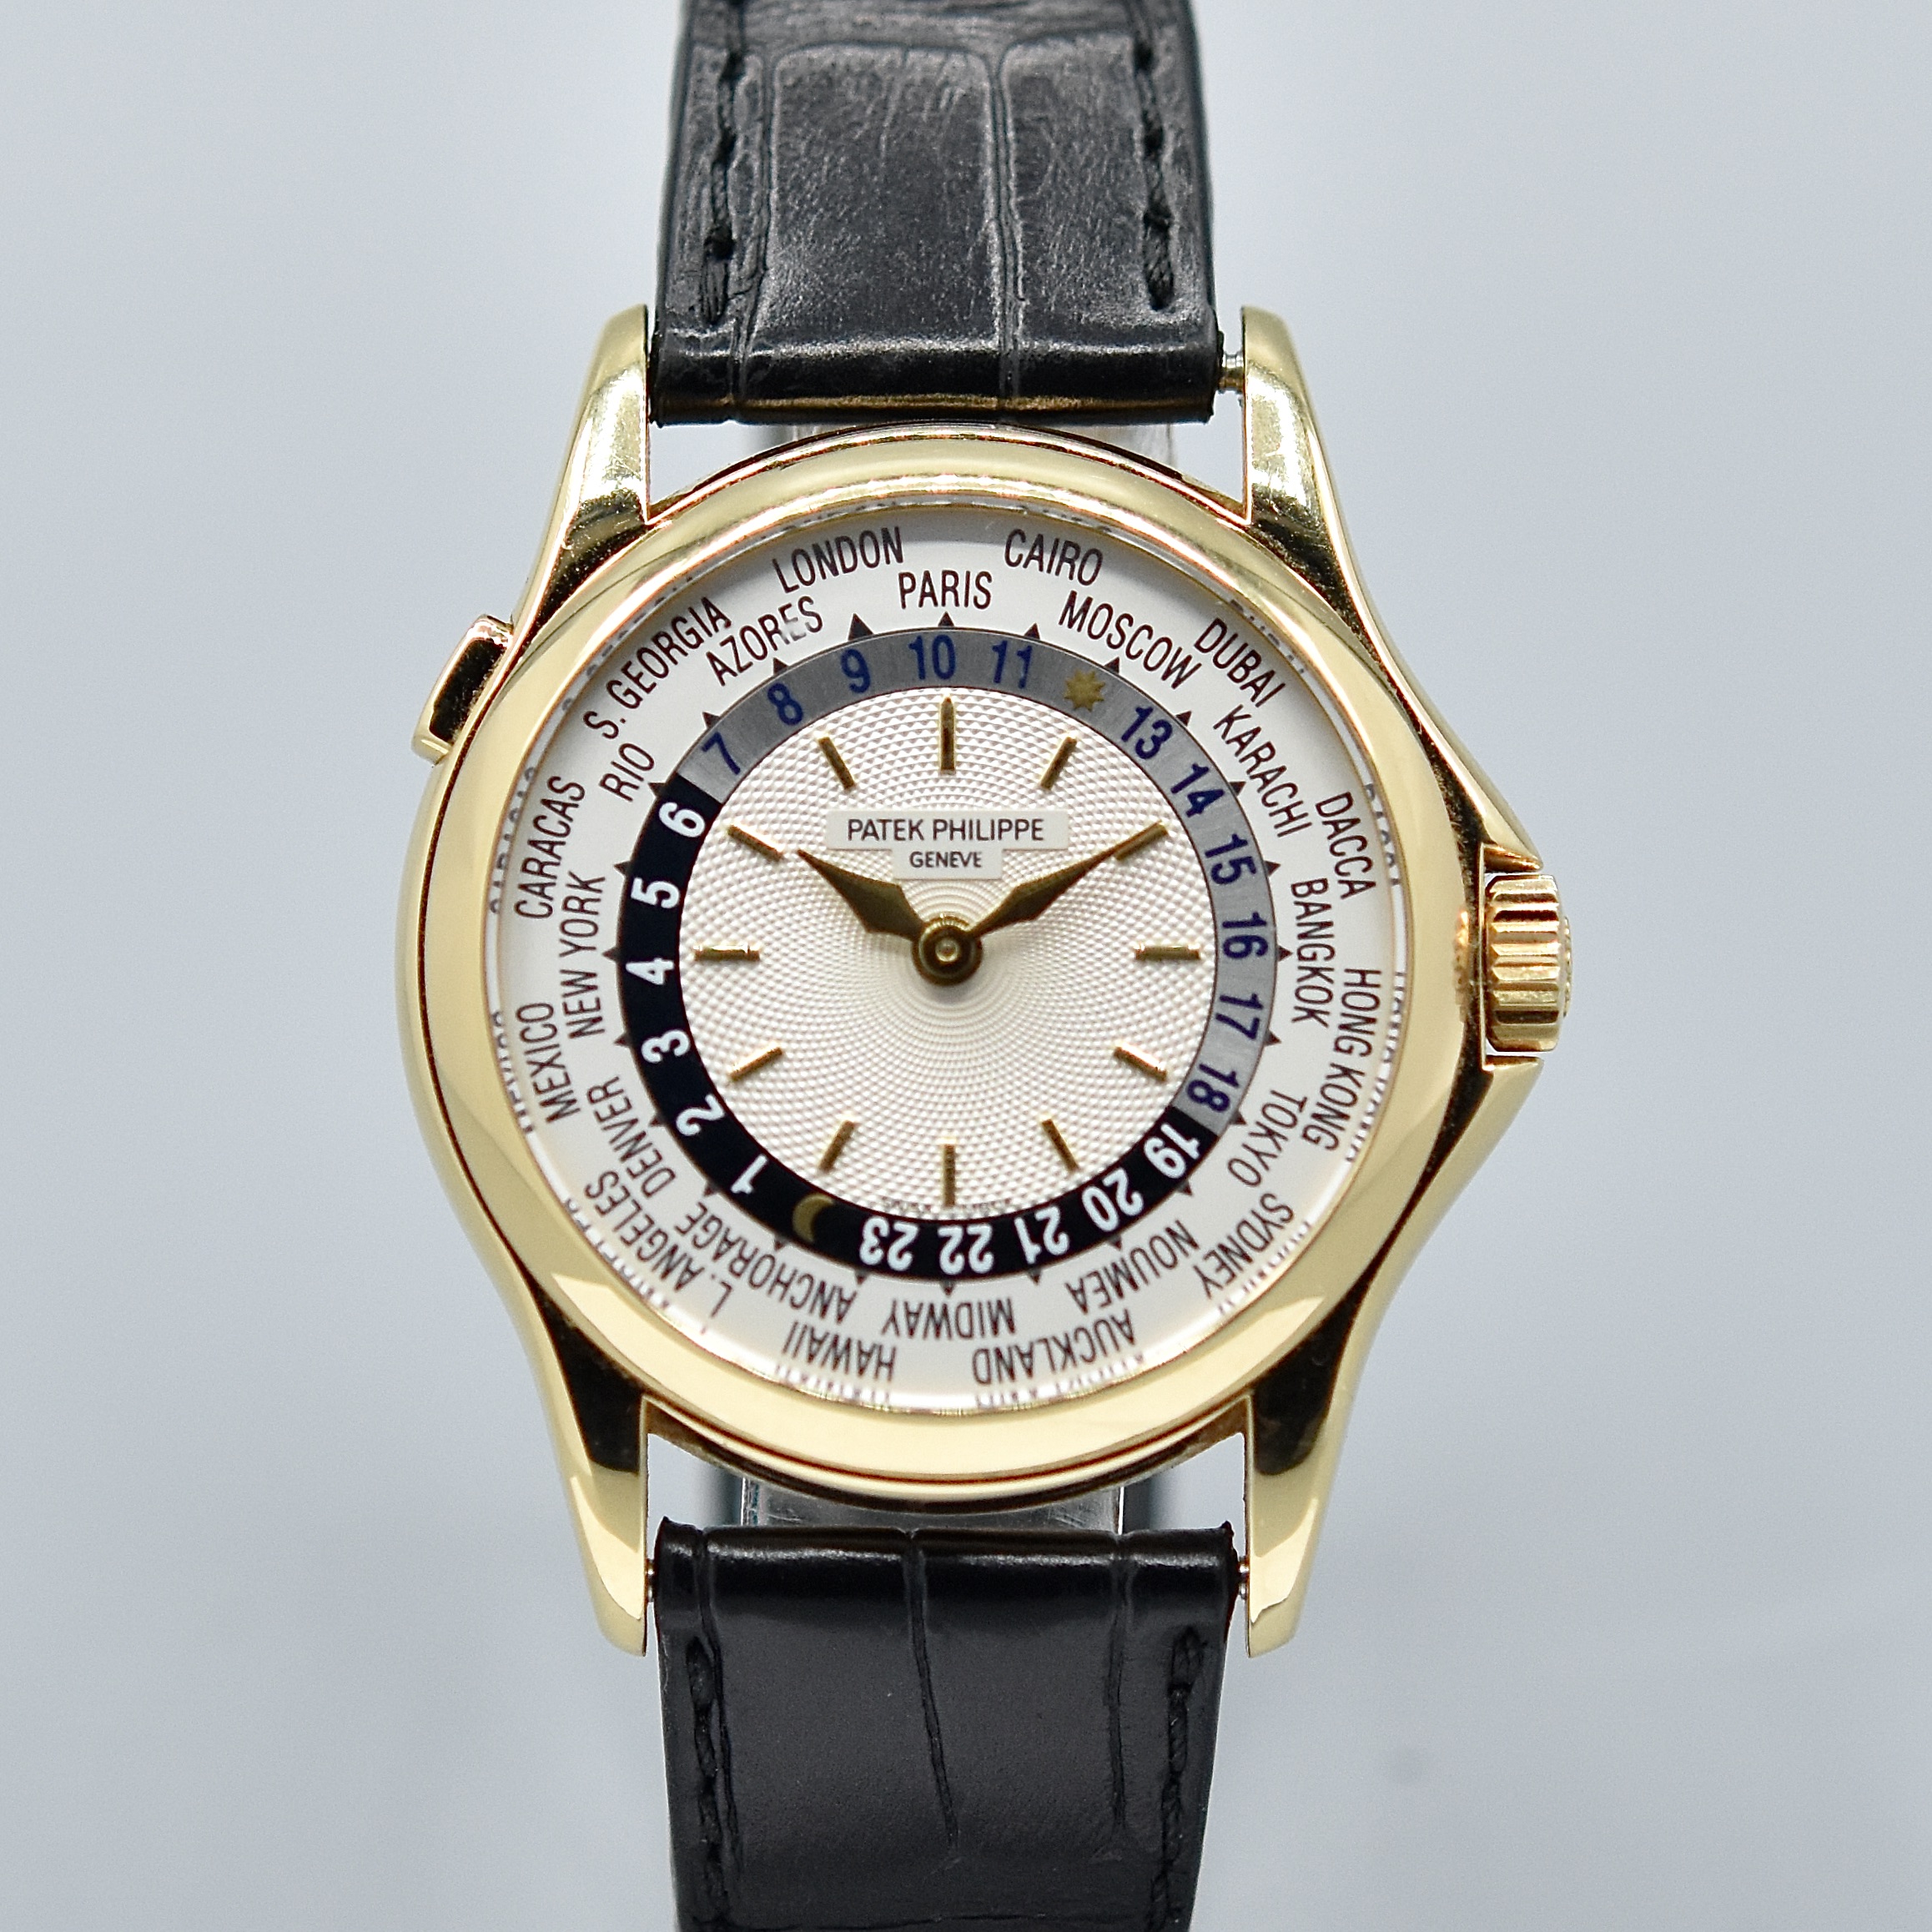 PATEK PHILIPPE WORLD TIME REF. 5110J BOX AND PAPERS